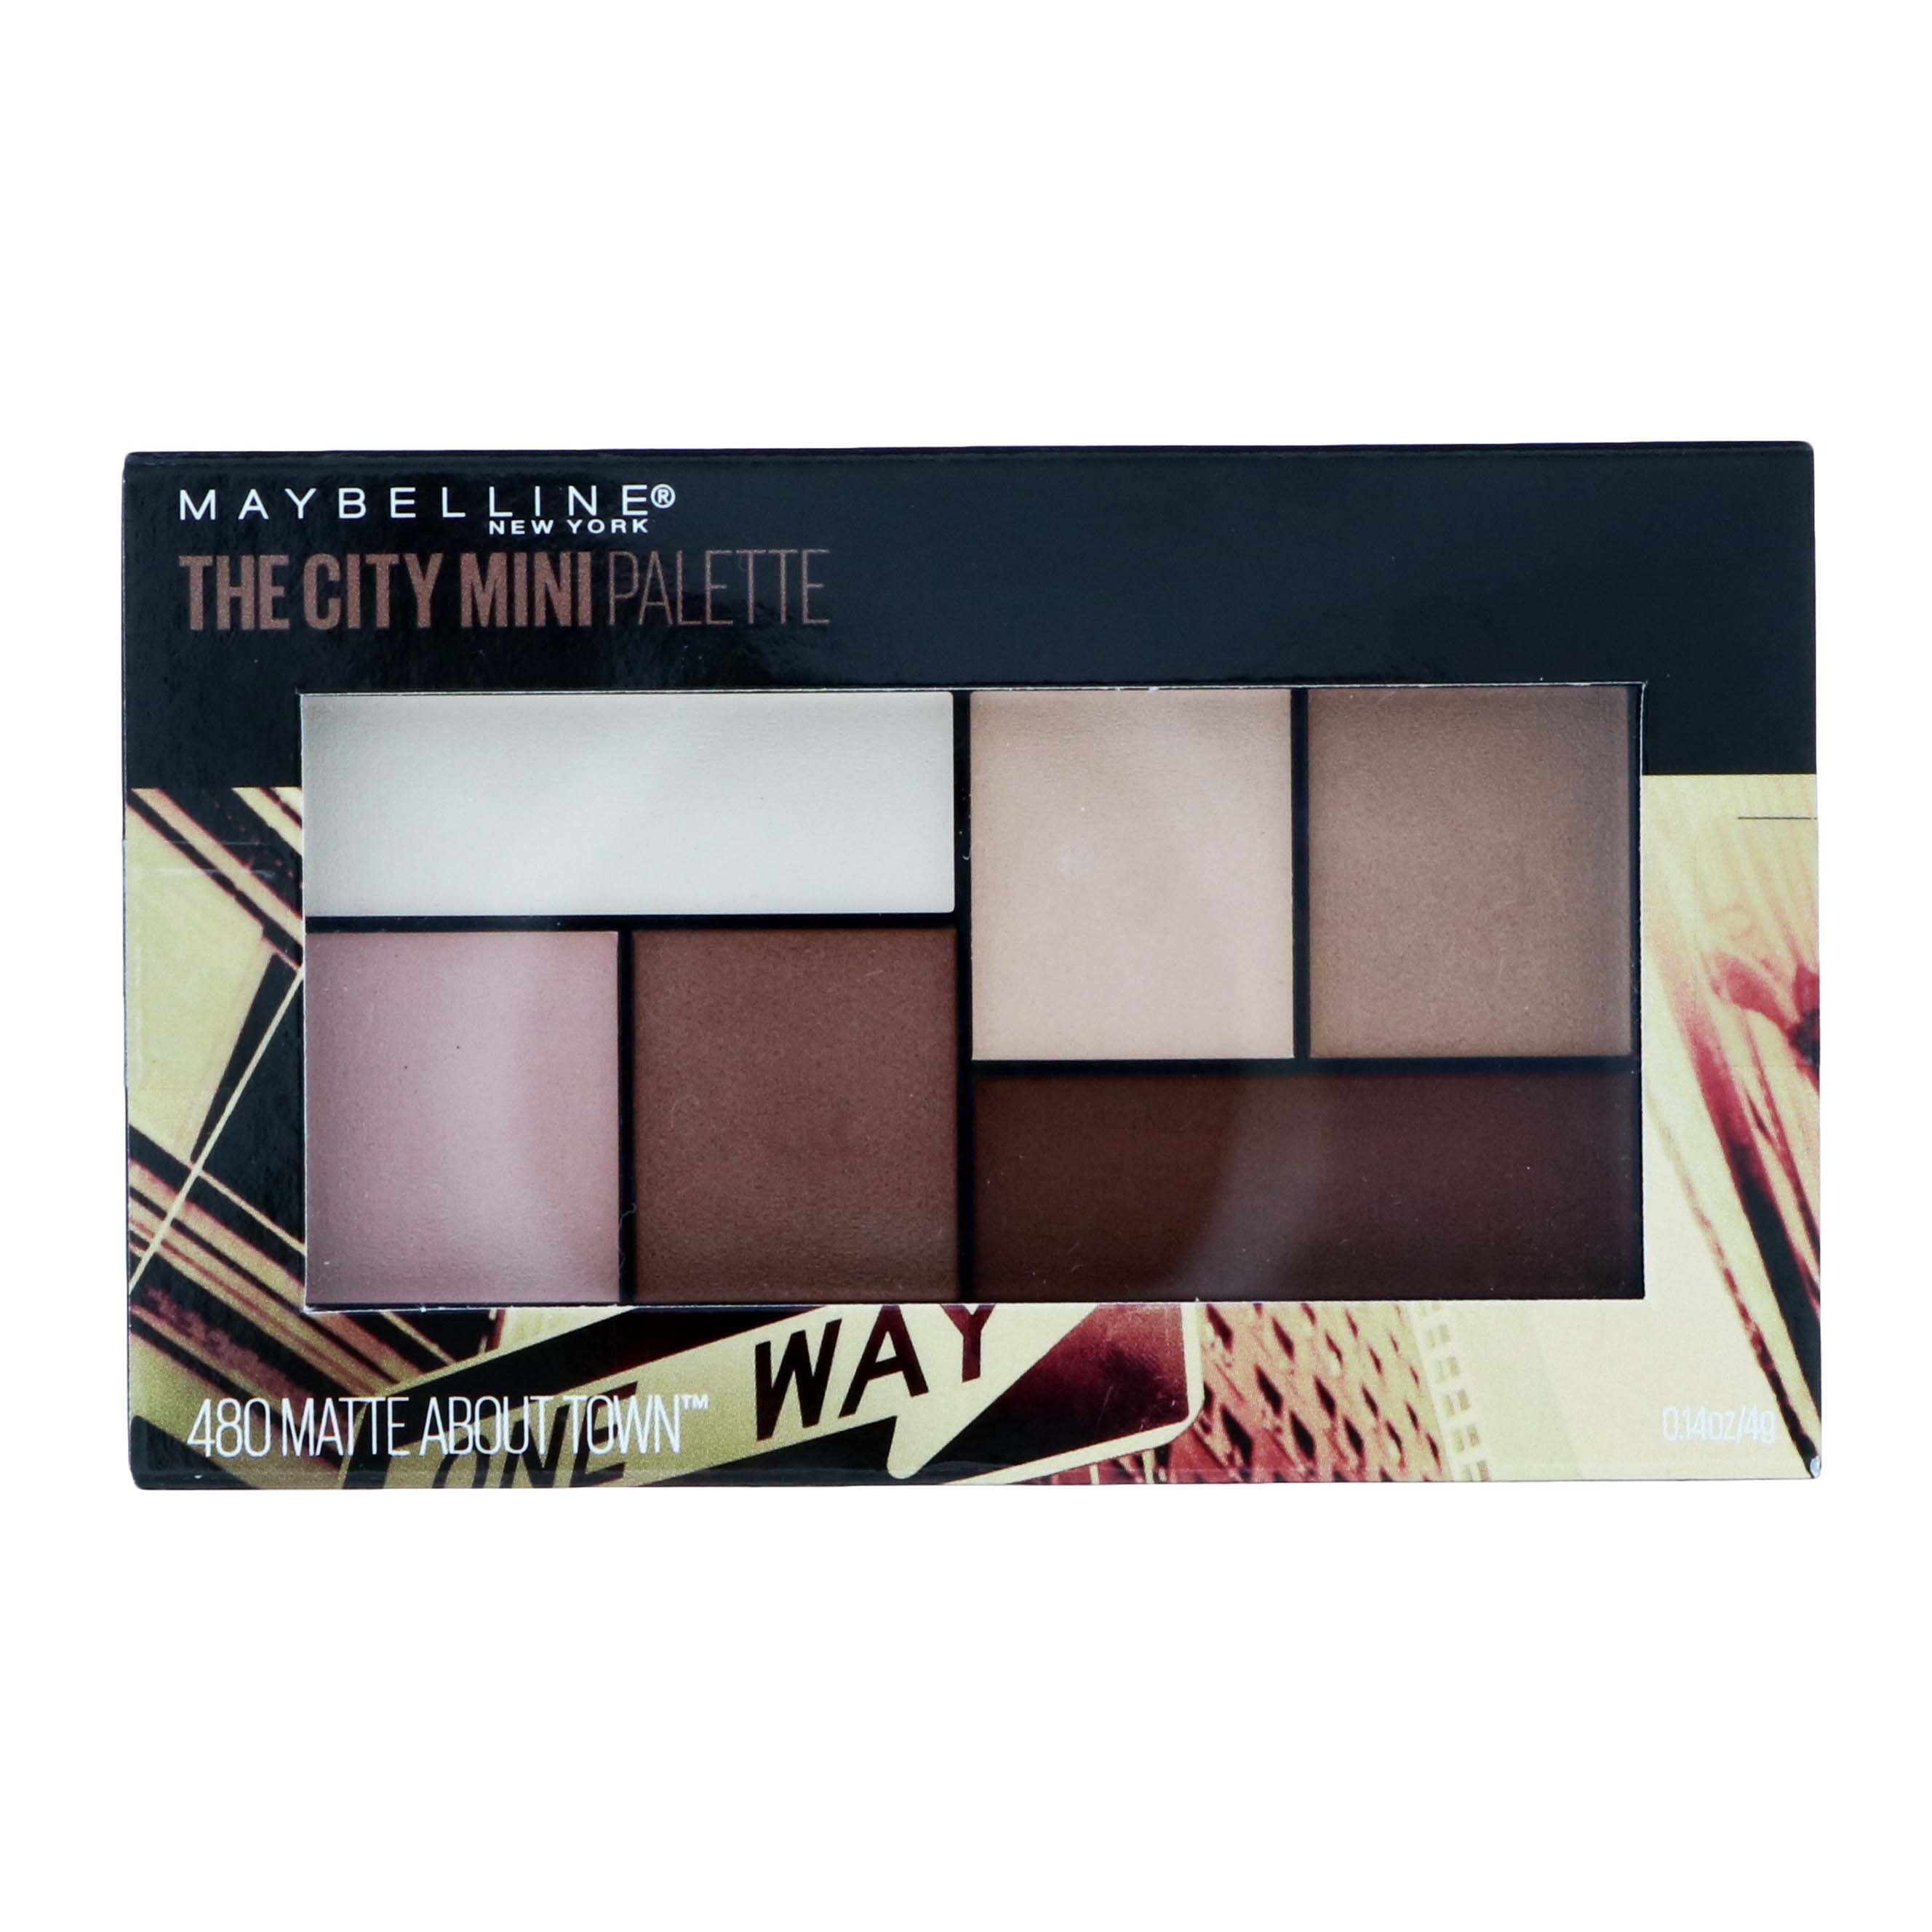 Shop at Town The - H-E-B Maybelline Palette, Eyeshadow Eyeshadow City Matte Mini About